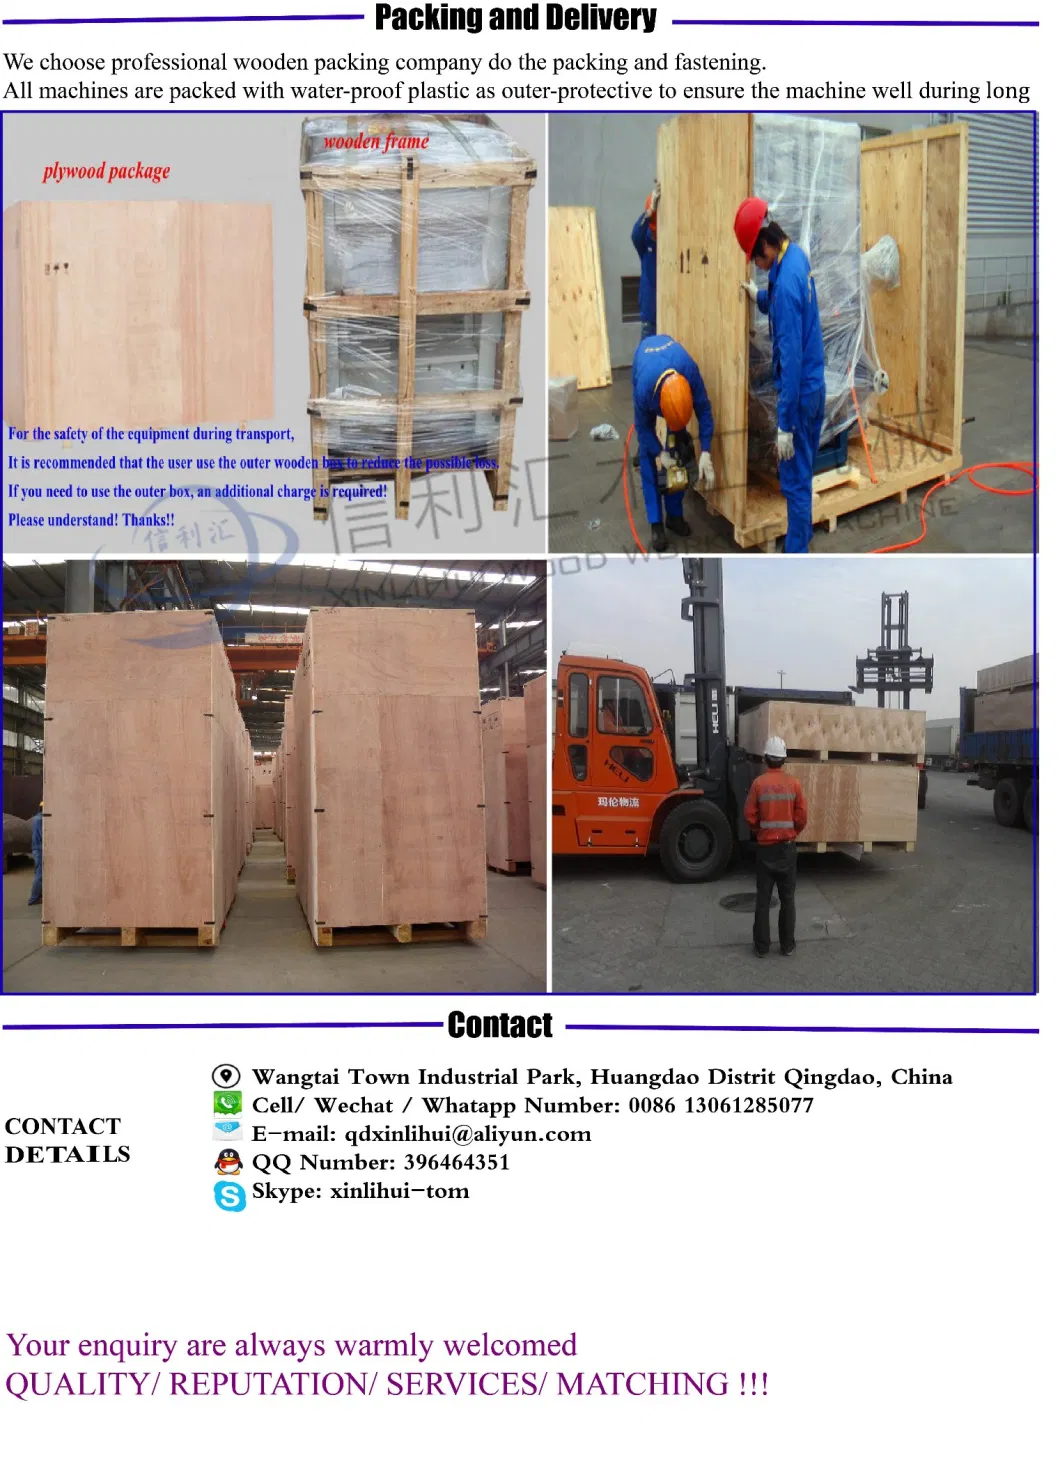 Xinlihui Brand 800 Ton 10 Layer Film Faced Hot Press with Ce/ Three/ Five/ Eight Layers160 Tons Wooden Door/ Joinery Board Hot Press Machinery